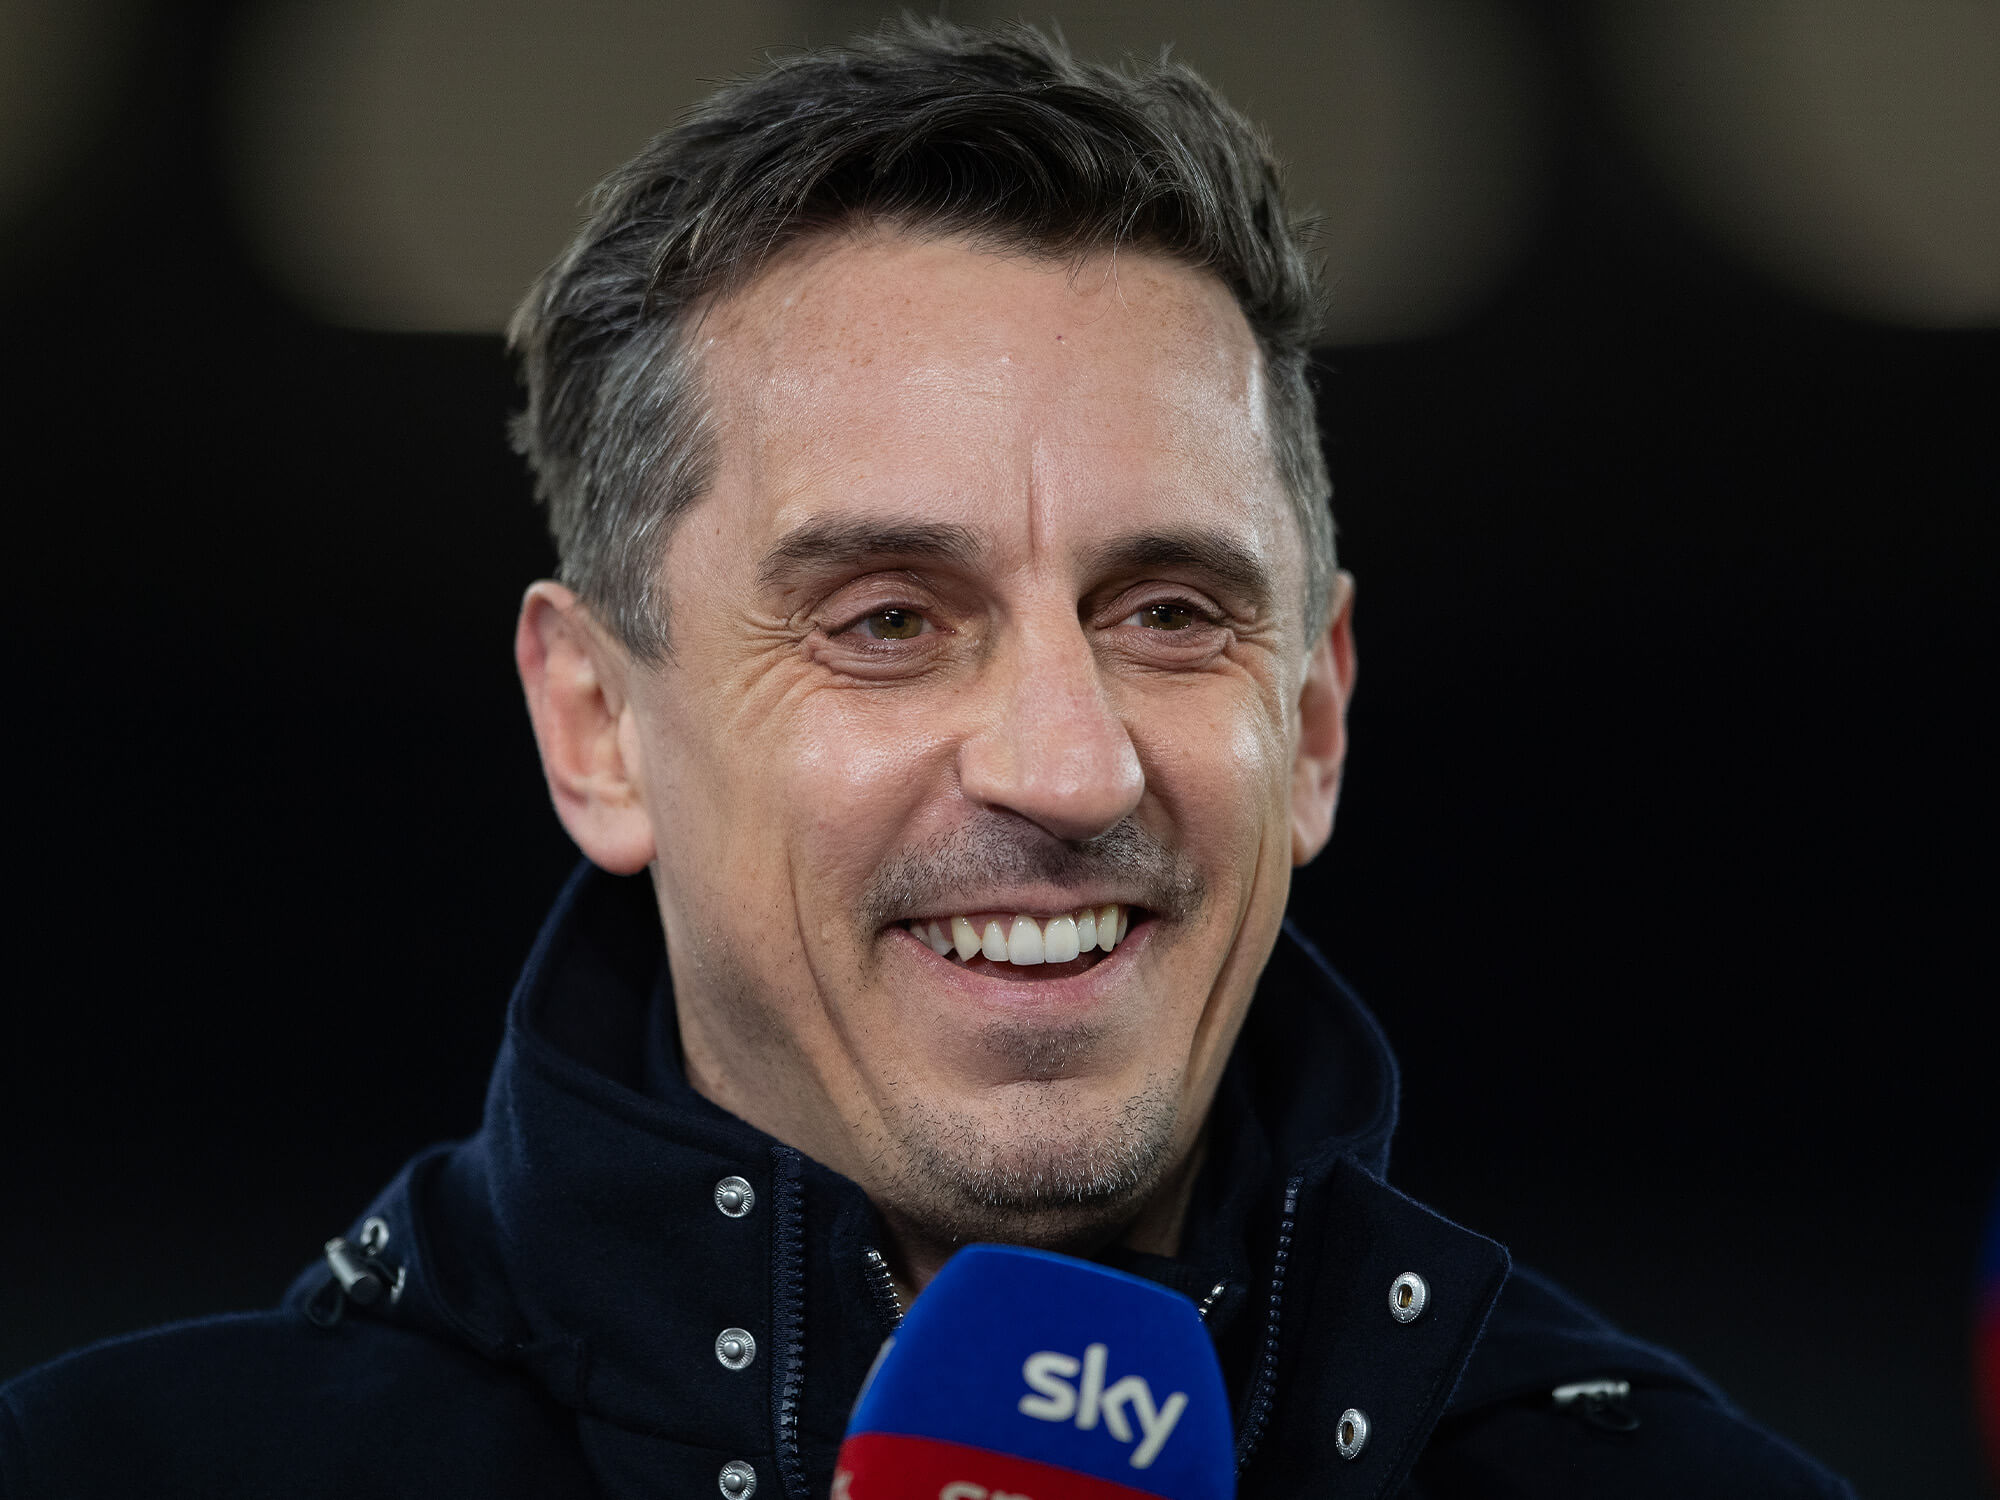 Gary Neville holding a football pundit mic and smiling